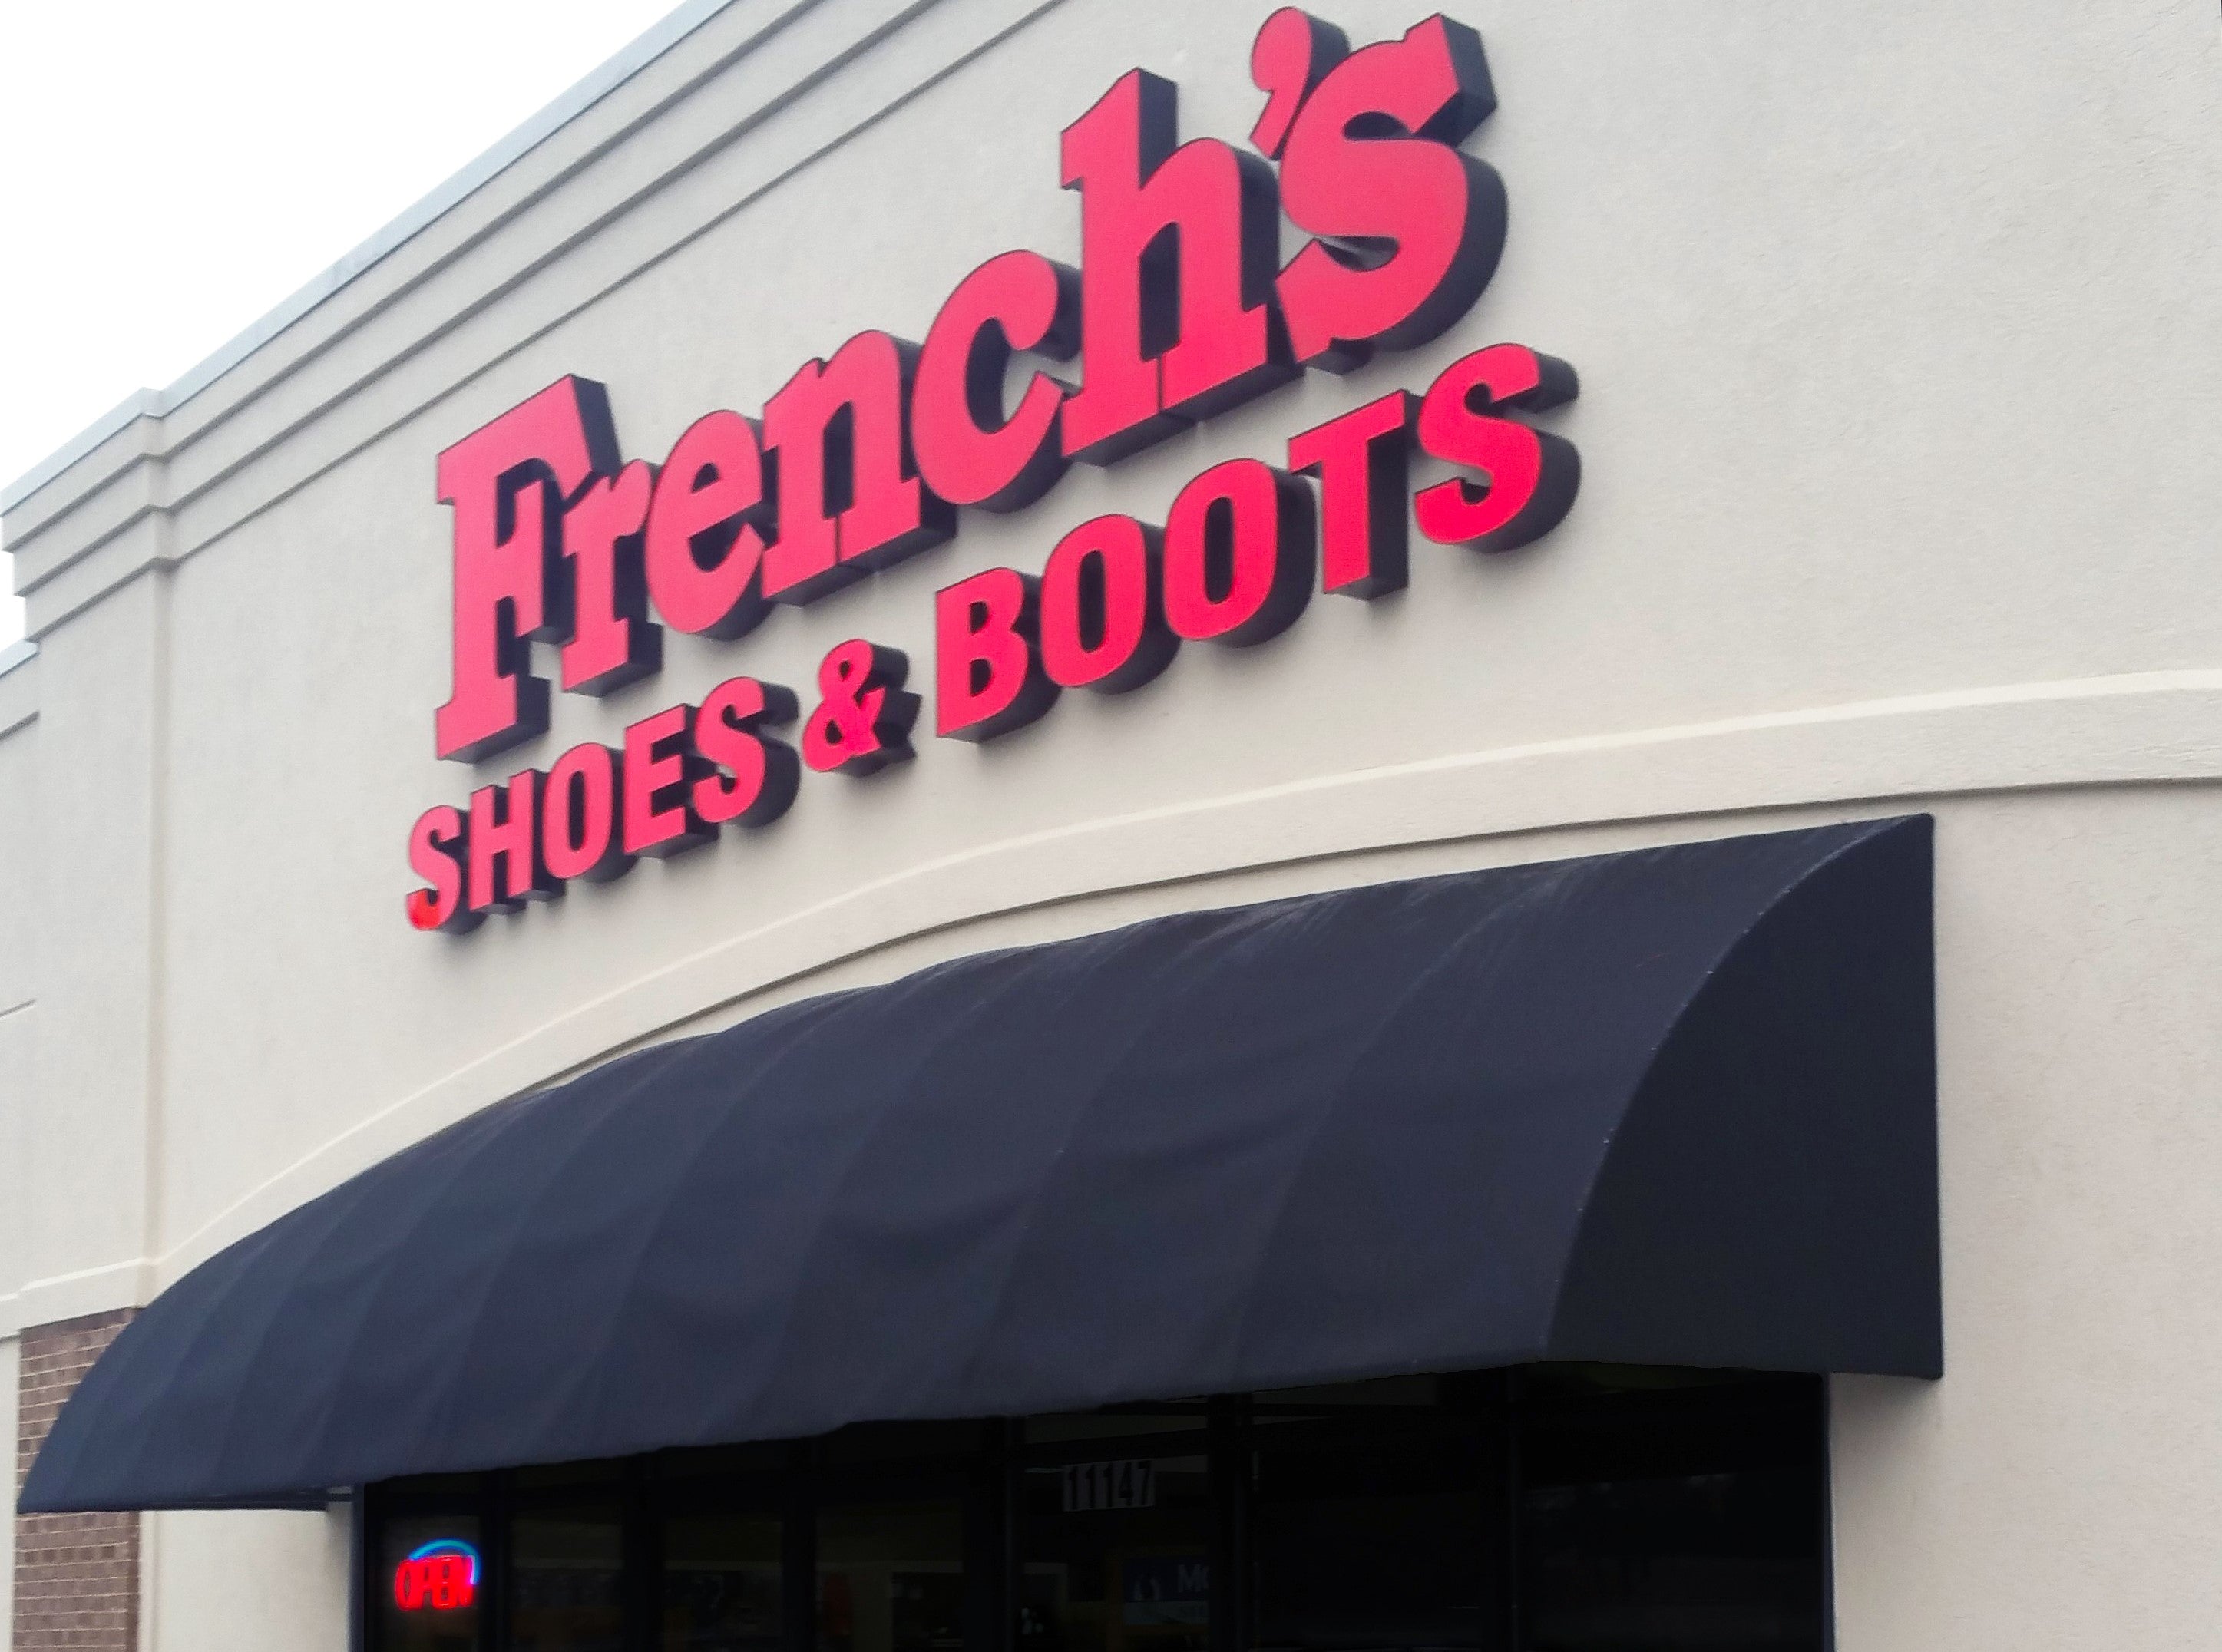 french's boot store knoxville tn